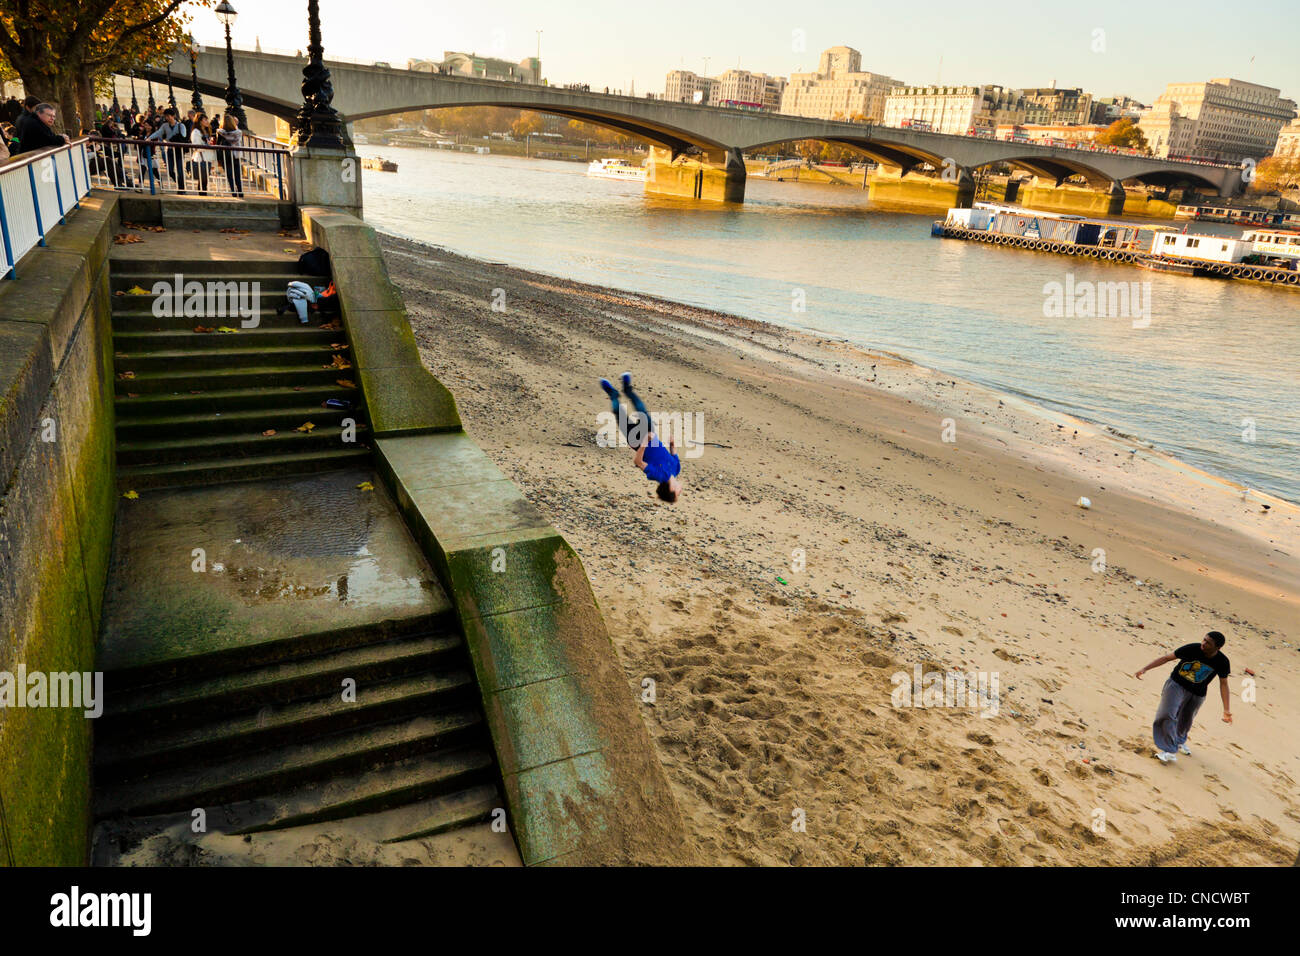 Boys playing, jumping and somersaulting onto the sand by the River Thames, London, England, UK Stock Photo